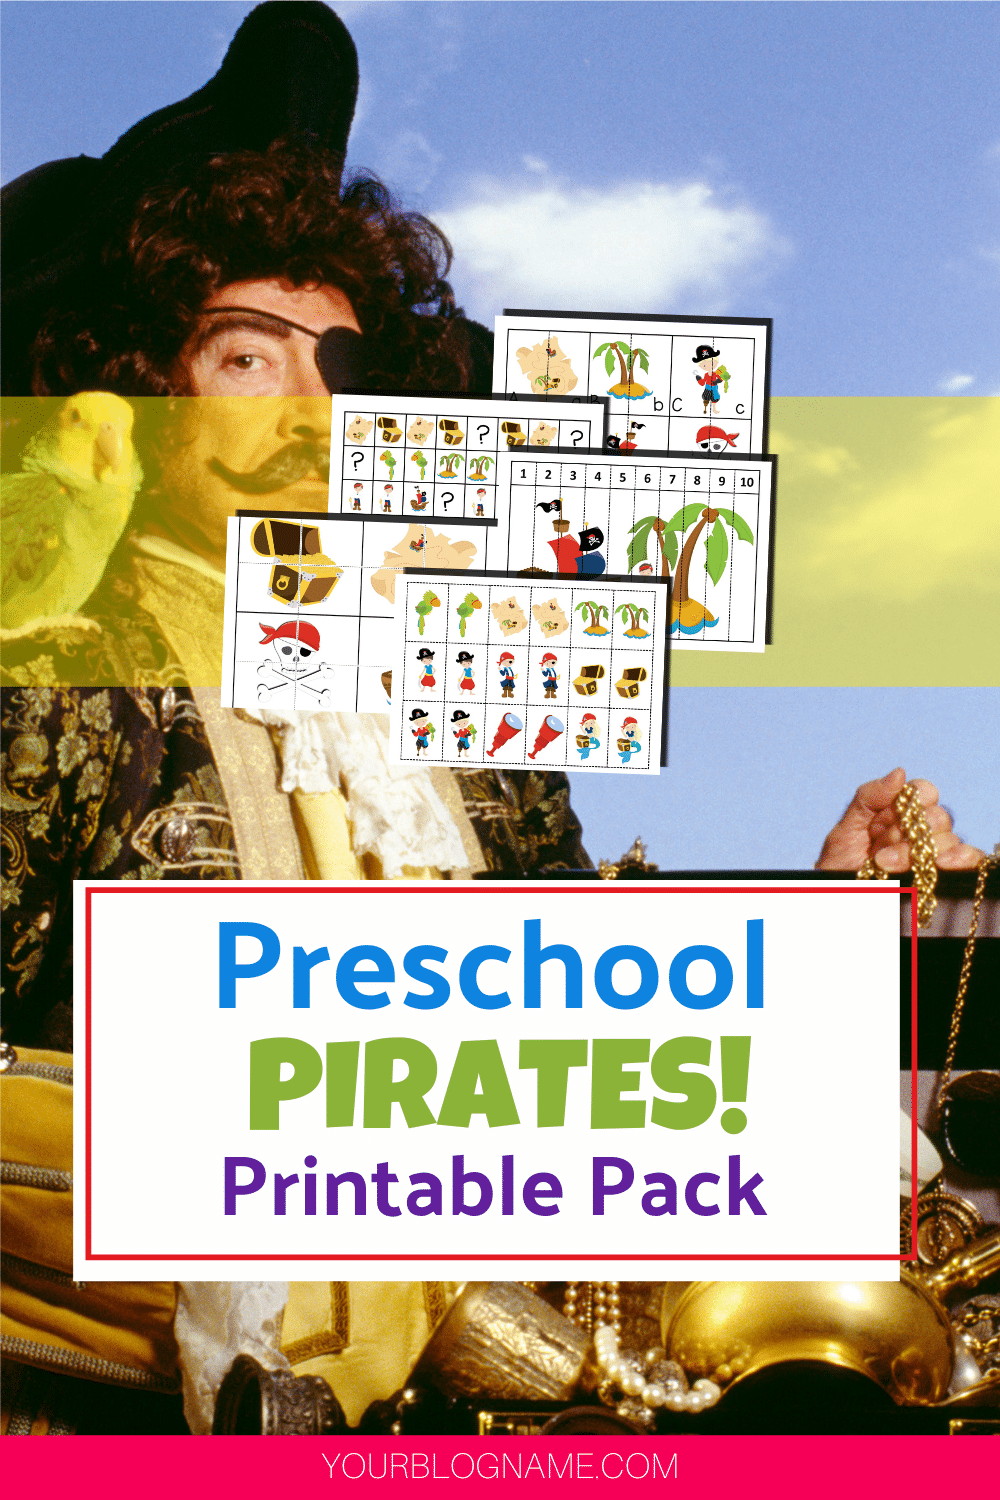 Got little pirates at your house? This fun printable pack is for them! It includes 20 activity pages with activities such as number sequencing, matching pictures, simple puzzles, tracing lines, patterns, ordering sizes, matching uppercase and lowercase letters, coloring pages, number recognition and 1:1 ratio, and even a pirate-themed tic-tac-toe game!